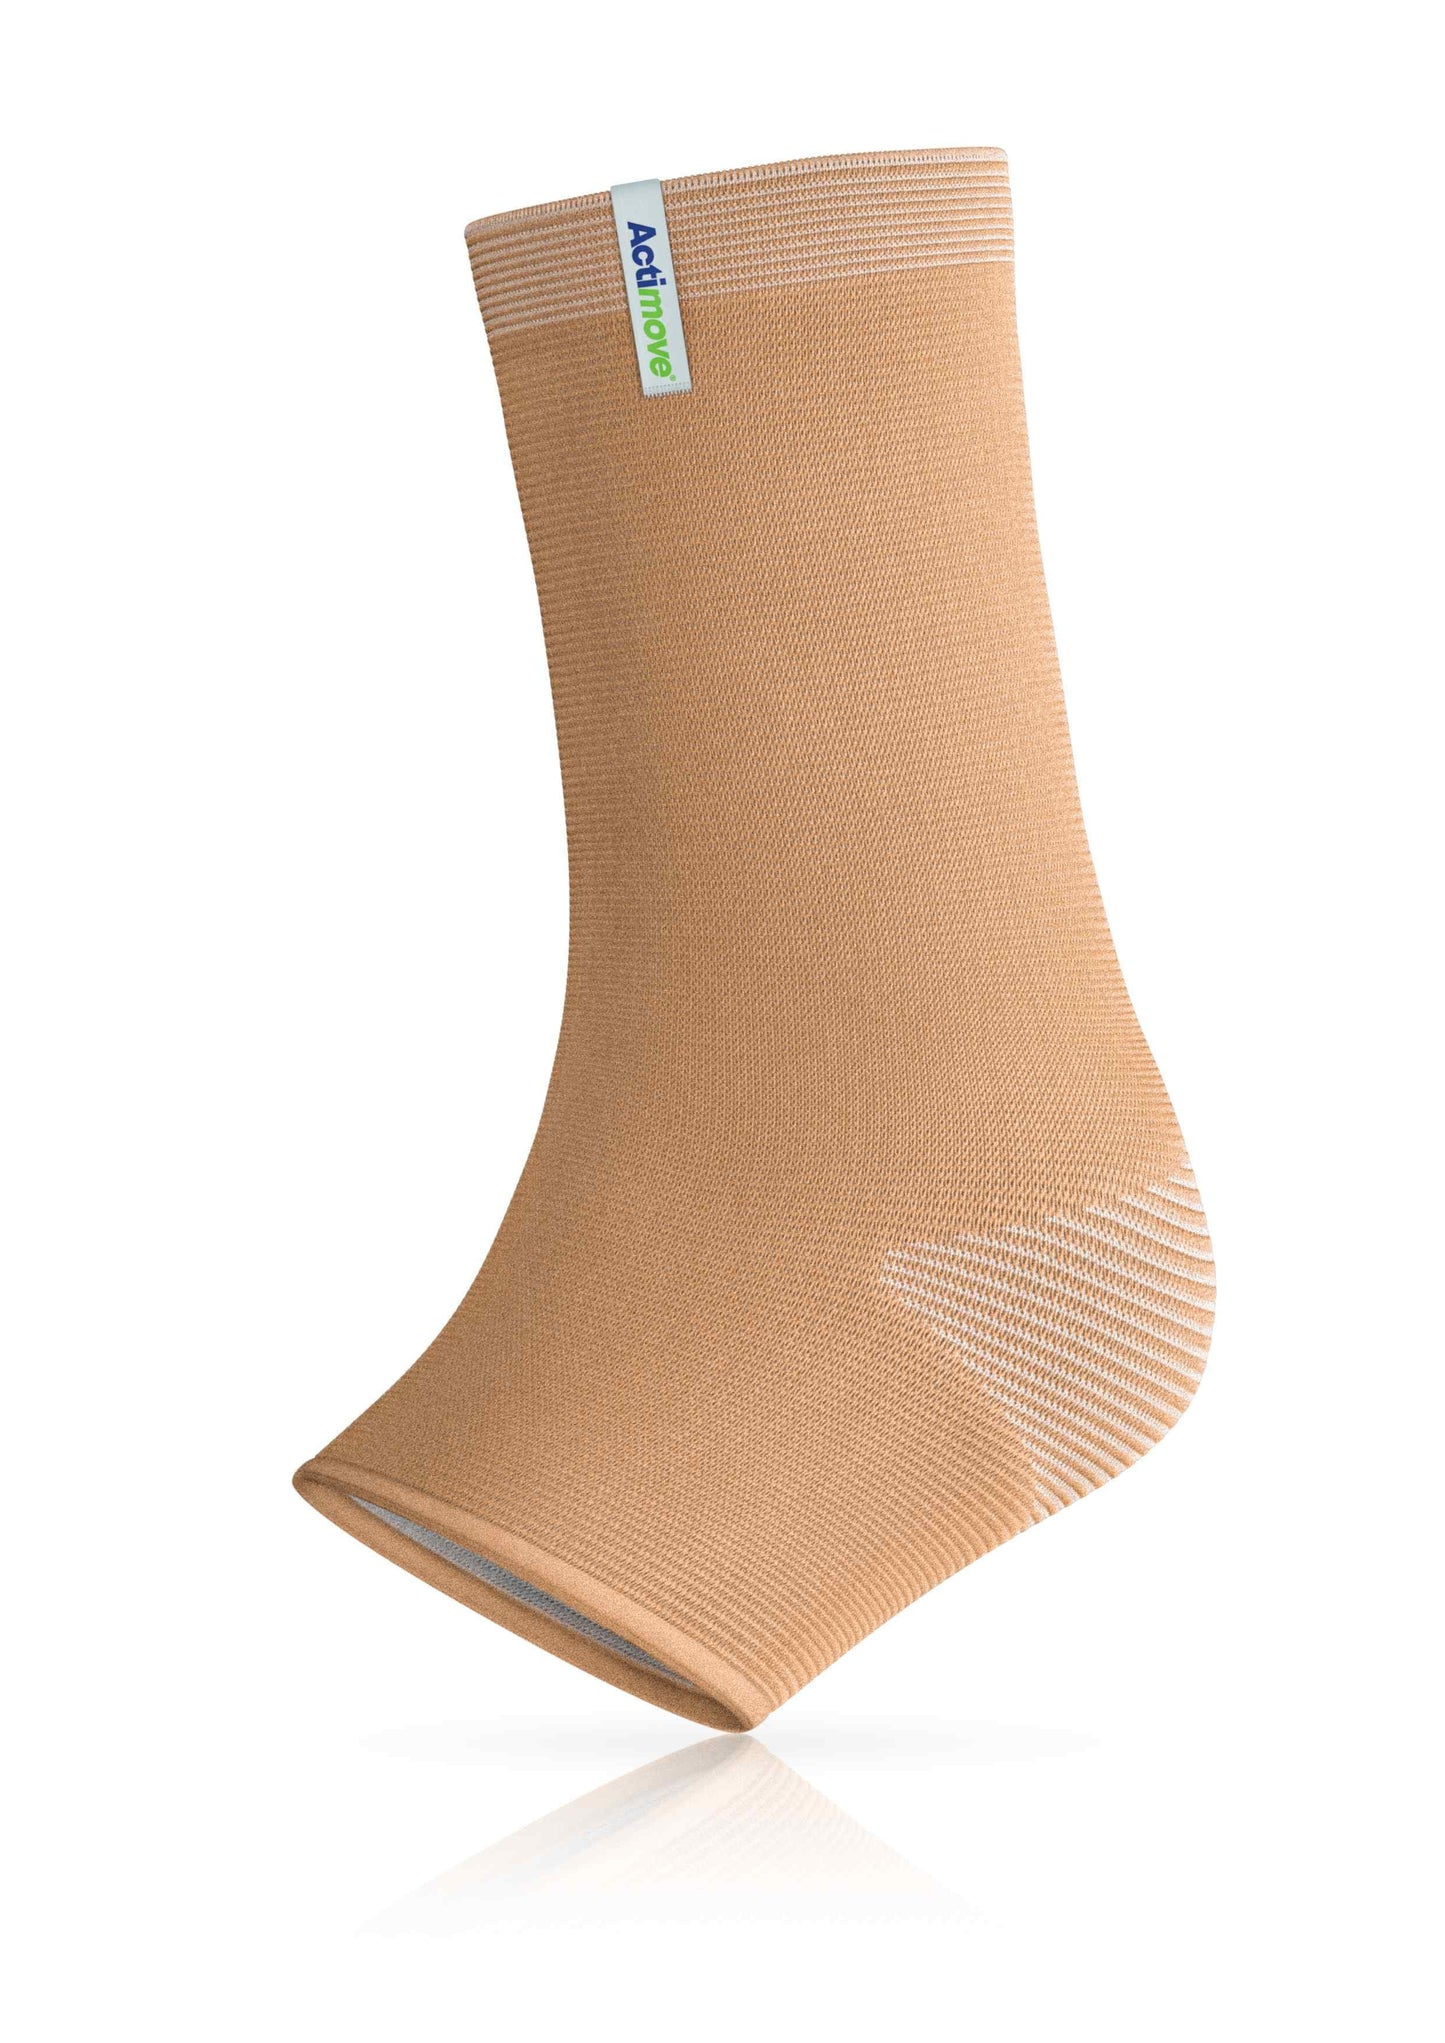 Actimove® Arthritis Ankle Support